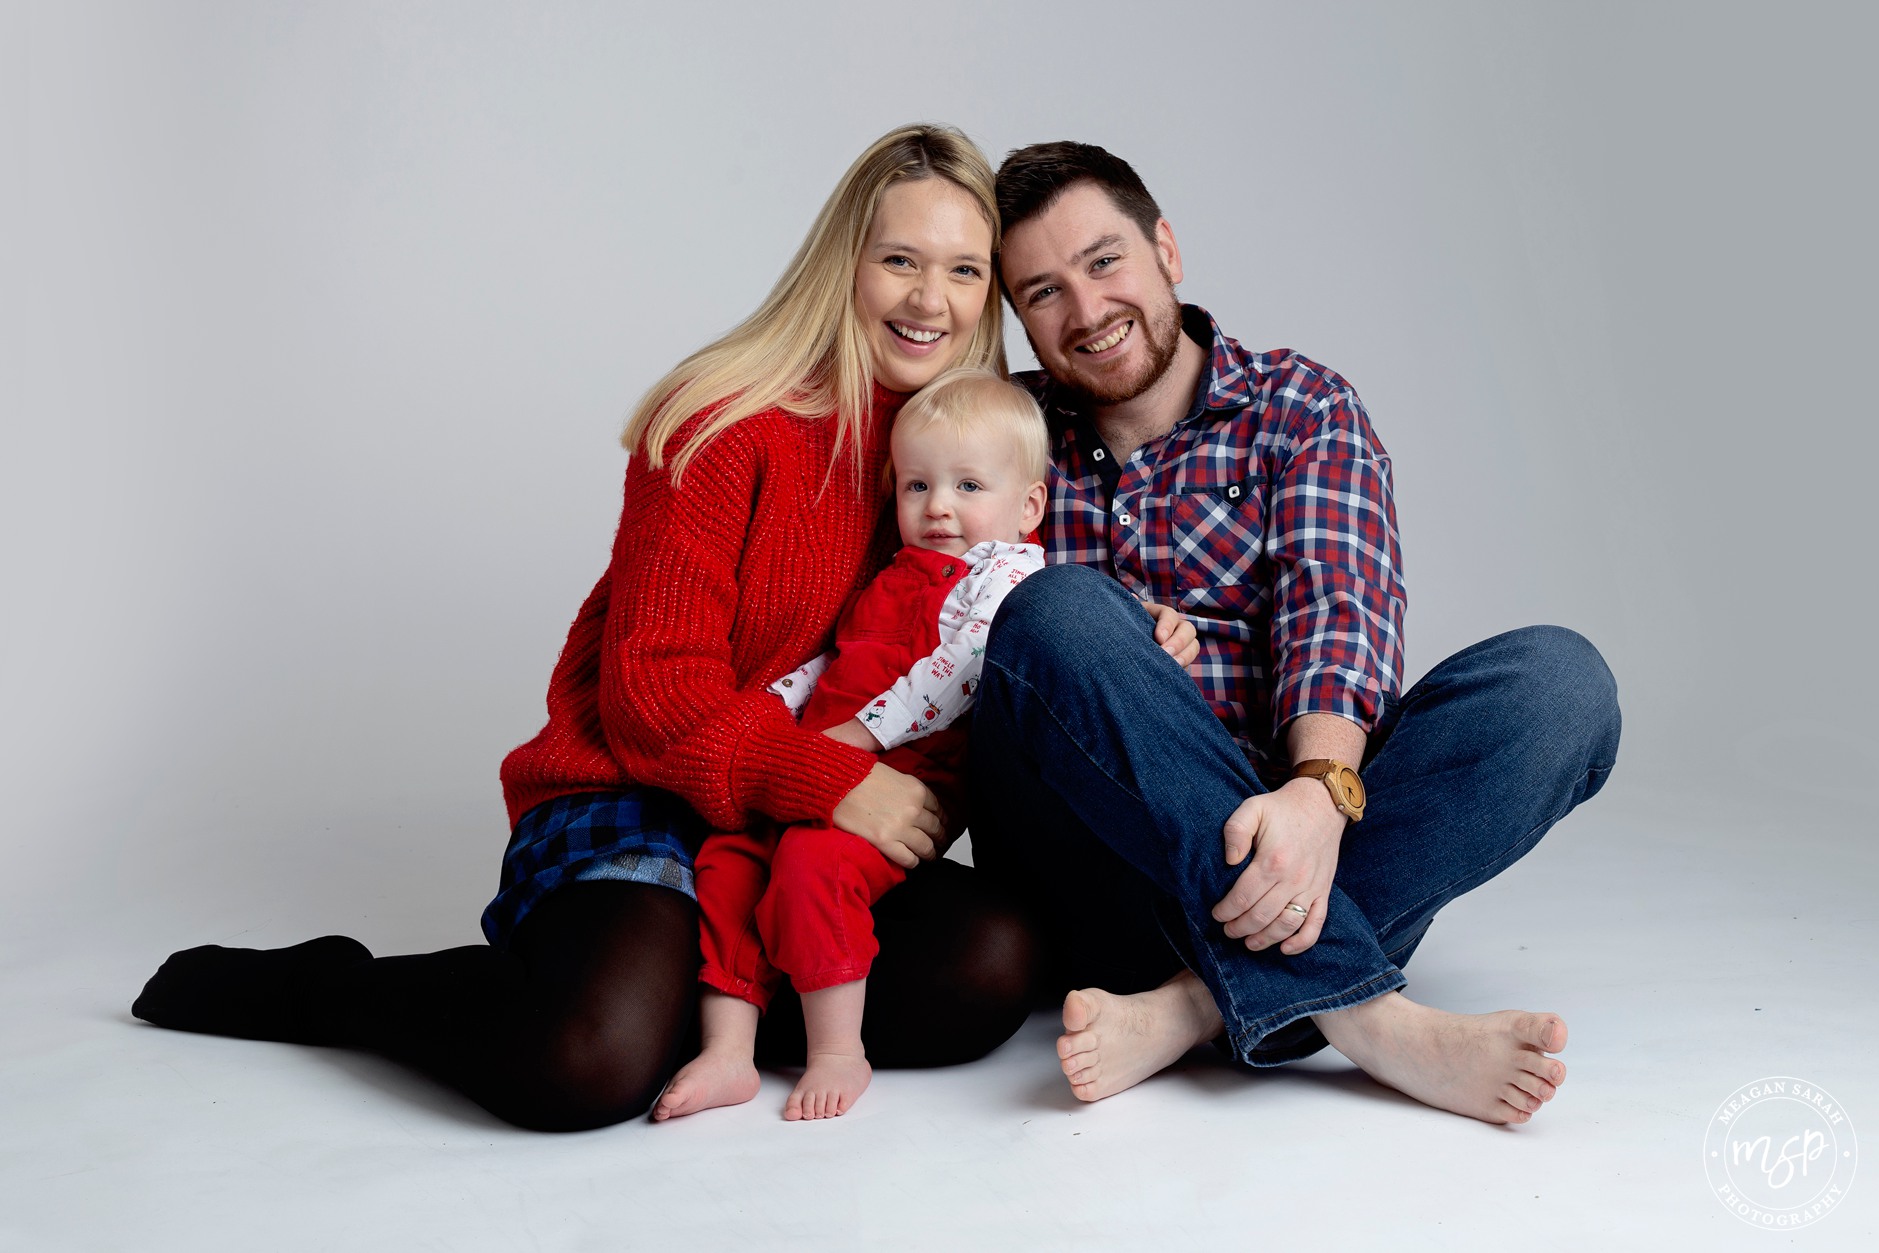 Group,Portrait,Family,Family of 7,Affordable photographer leeds,Fun Photos,Horsforth,Leeds,Little Ones,Meagan Sarah Photography,Studio,Professional Photographer in Leeds,Pictures,Photographs,White background,West Yorkshire Photographer,